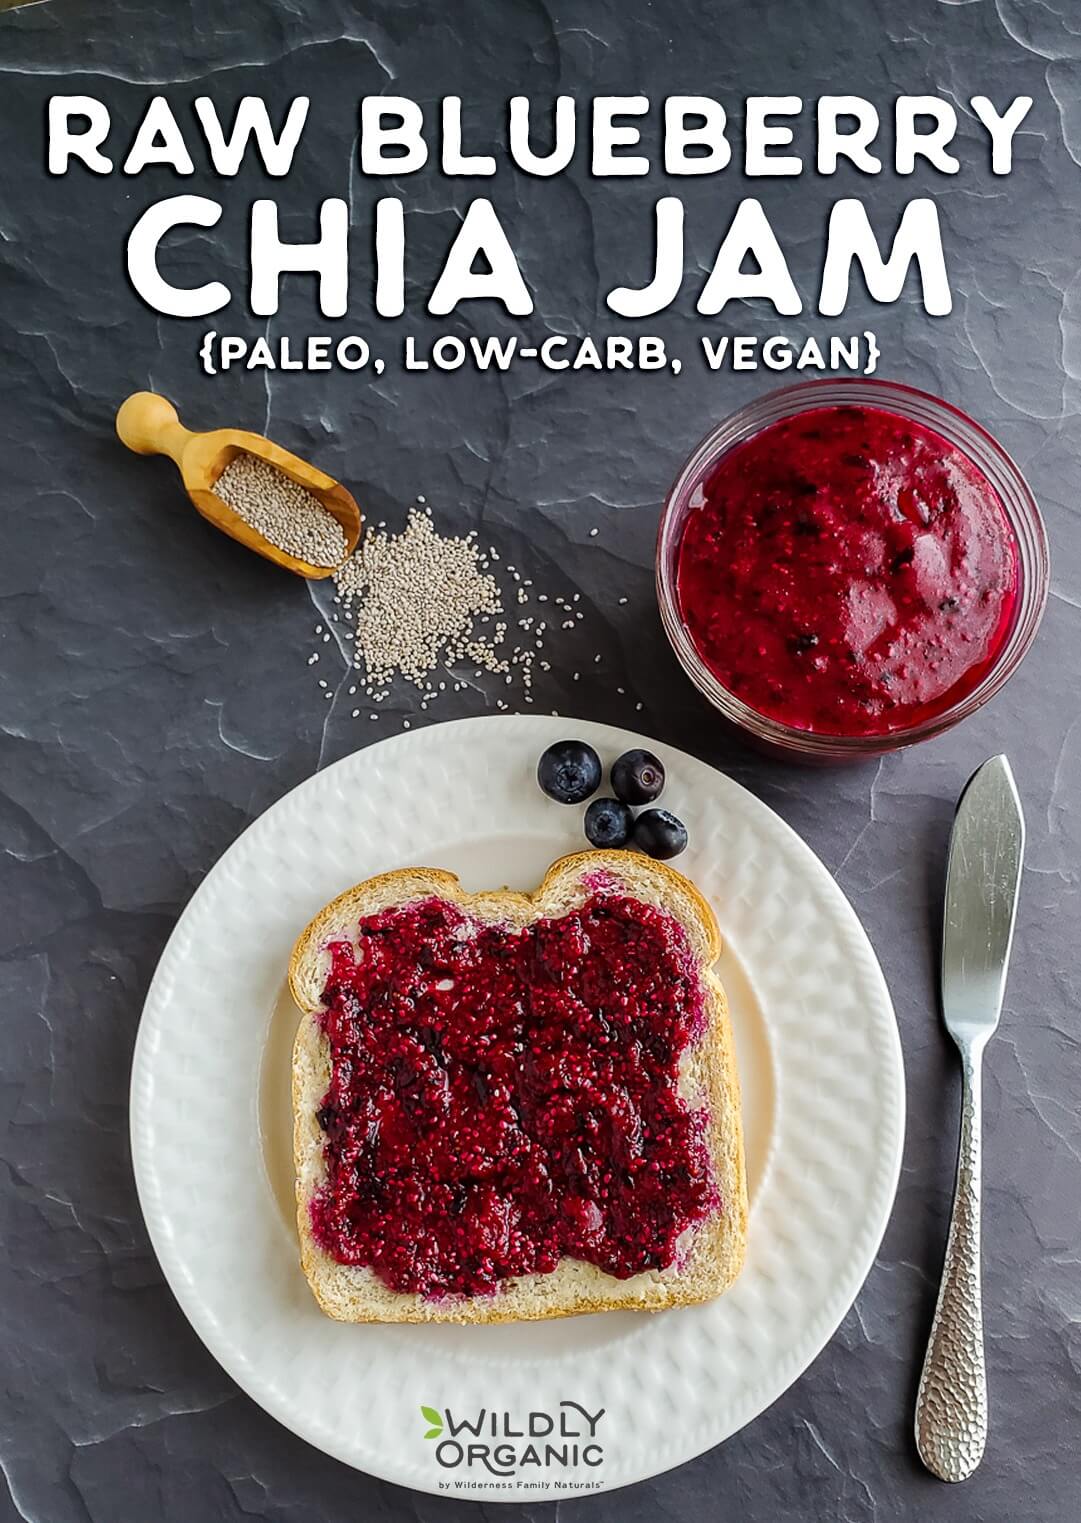 A photo of a piece of toast on a plate with raw blueberry chia jam on top with a bowl of chia jam on a table.